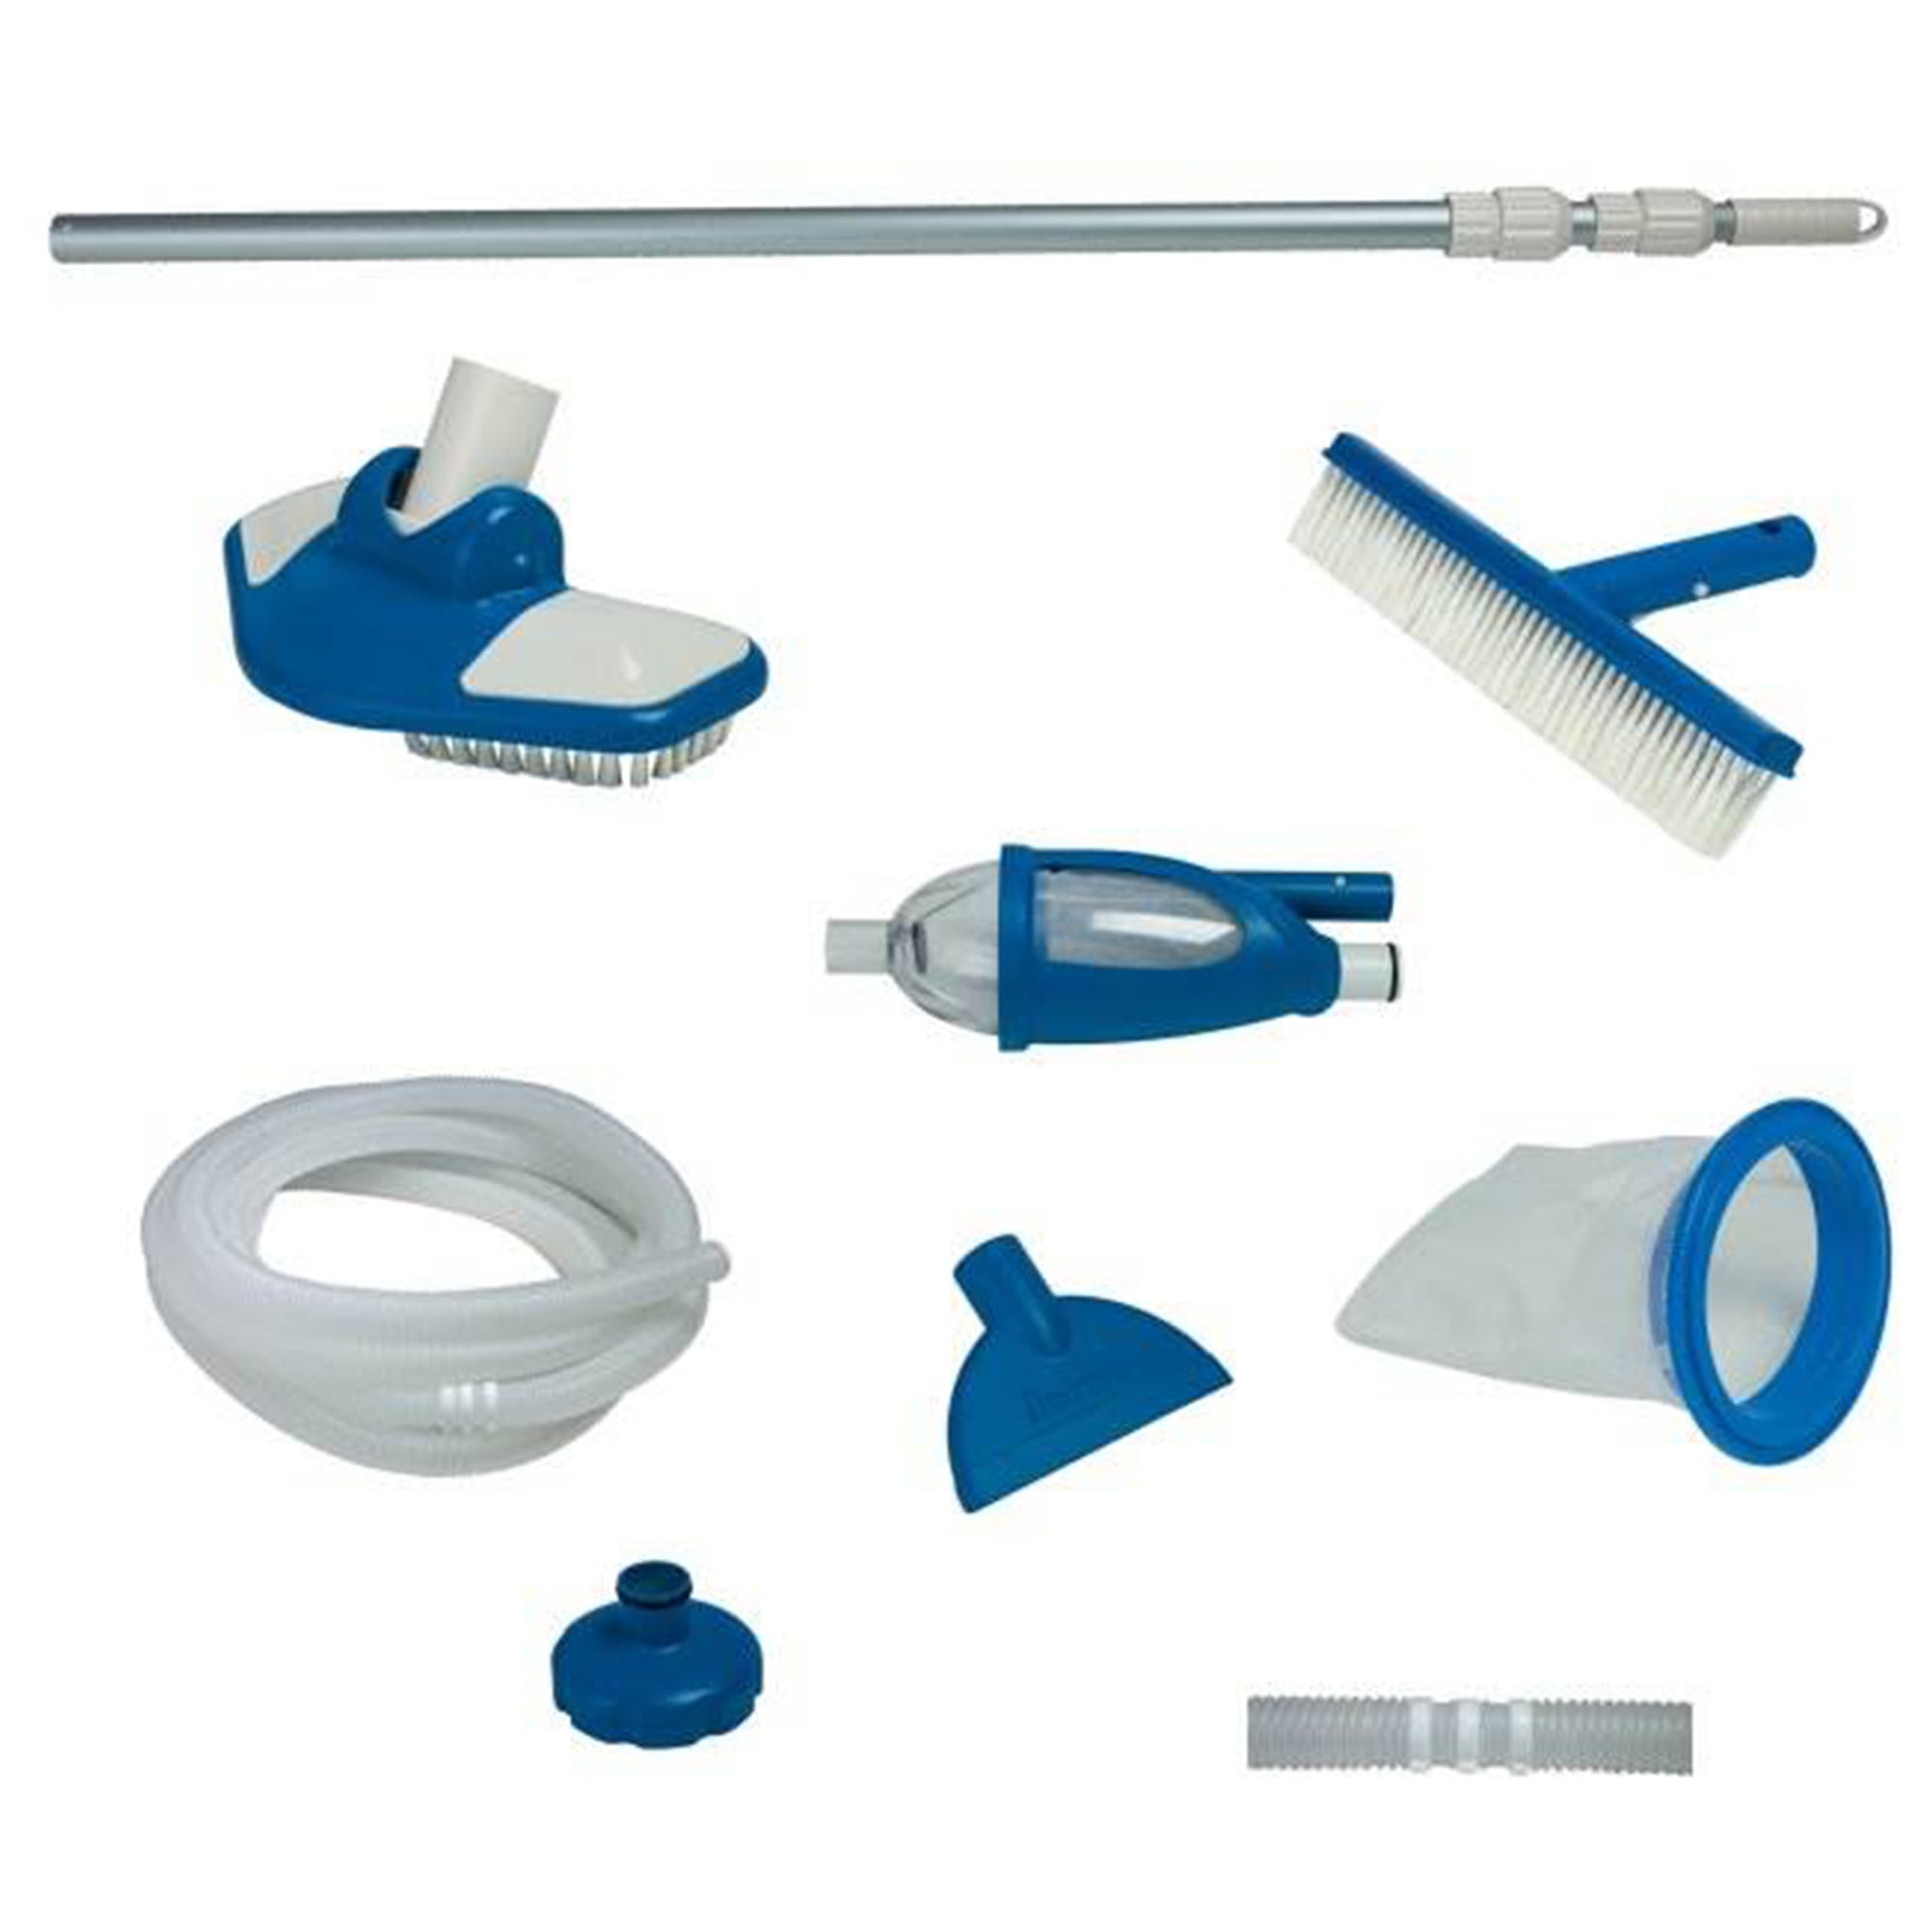 Intex 28003E Deluxe Pool Maintenance Kit for Above Ground Pools 